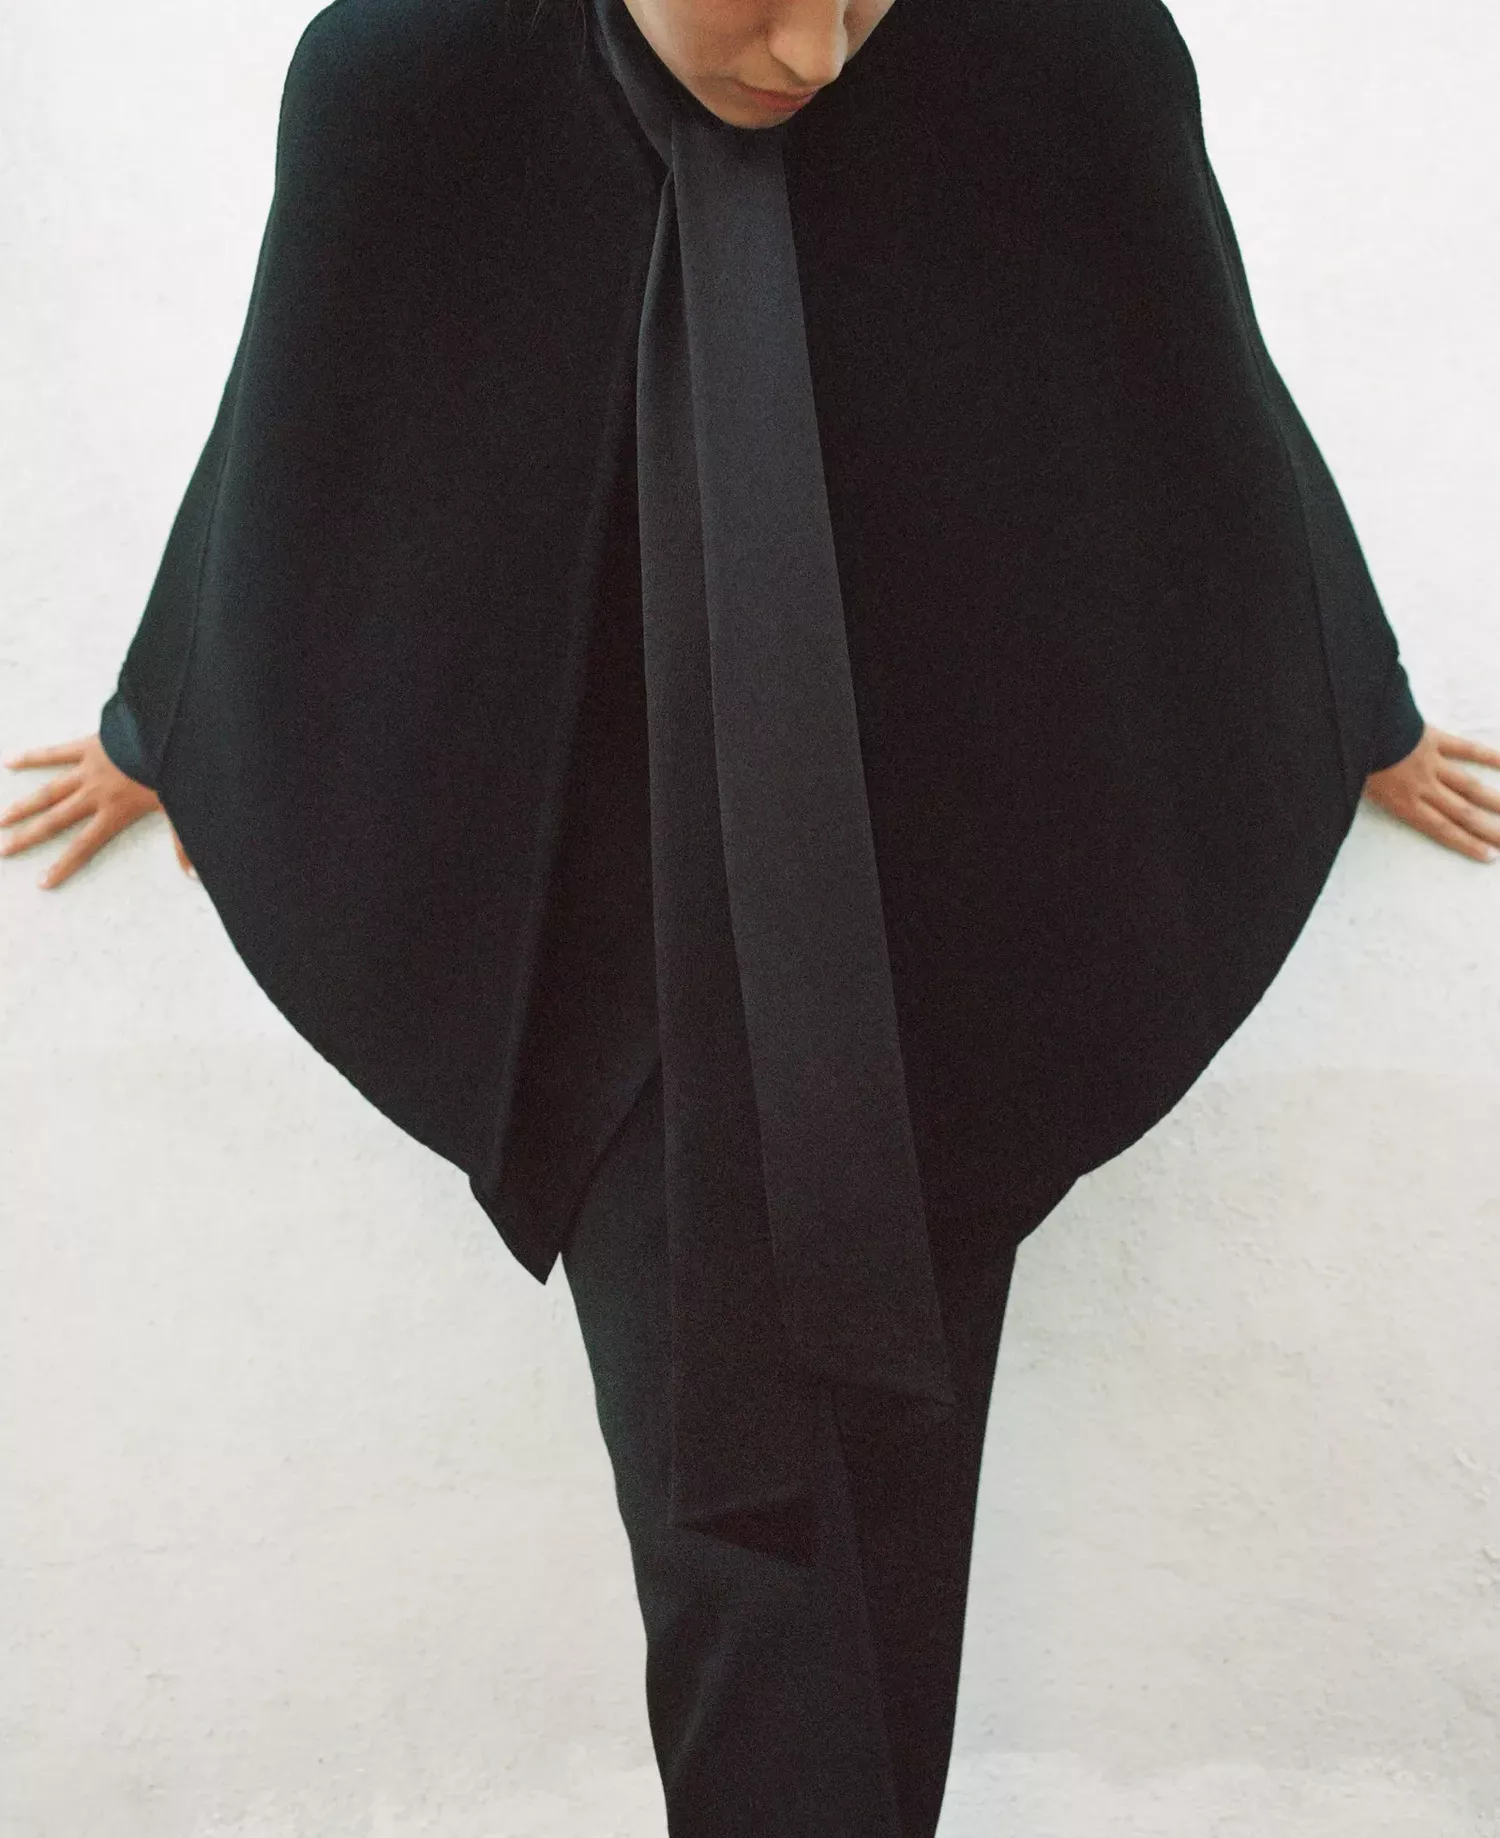 Angelina Jolie collaborated with Gabriela Hearst on this cape design, based on a similar piece from her own closet.